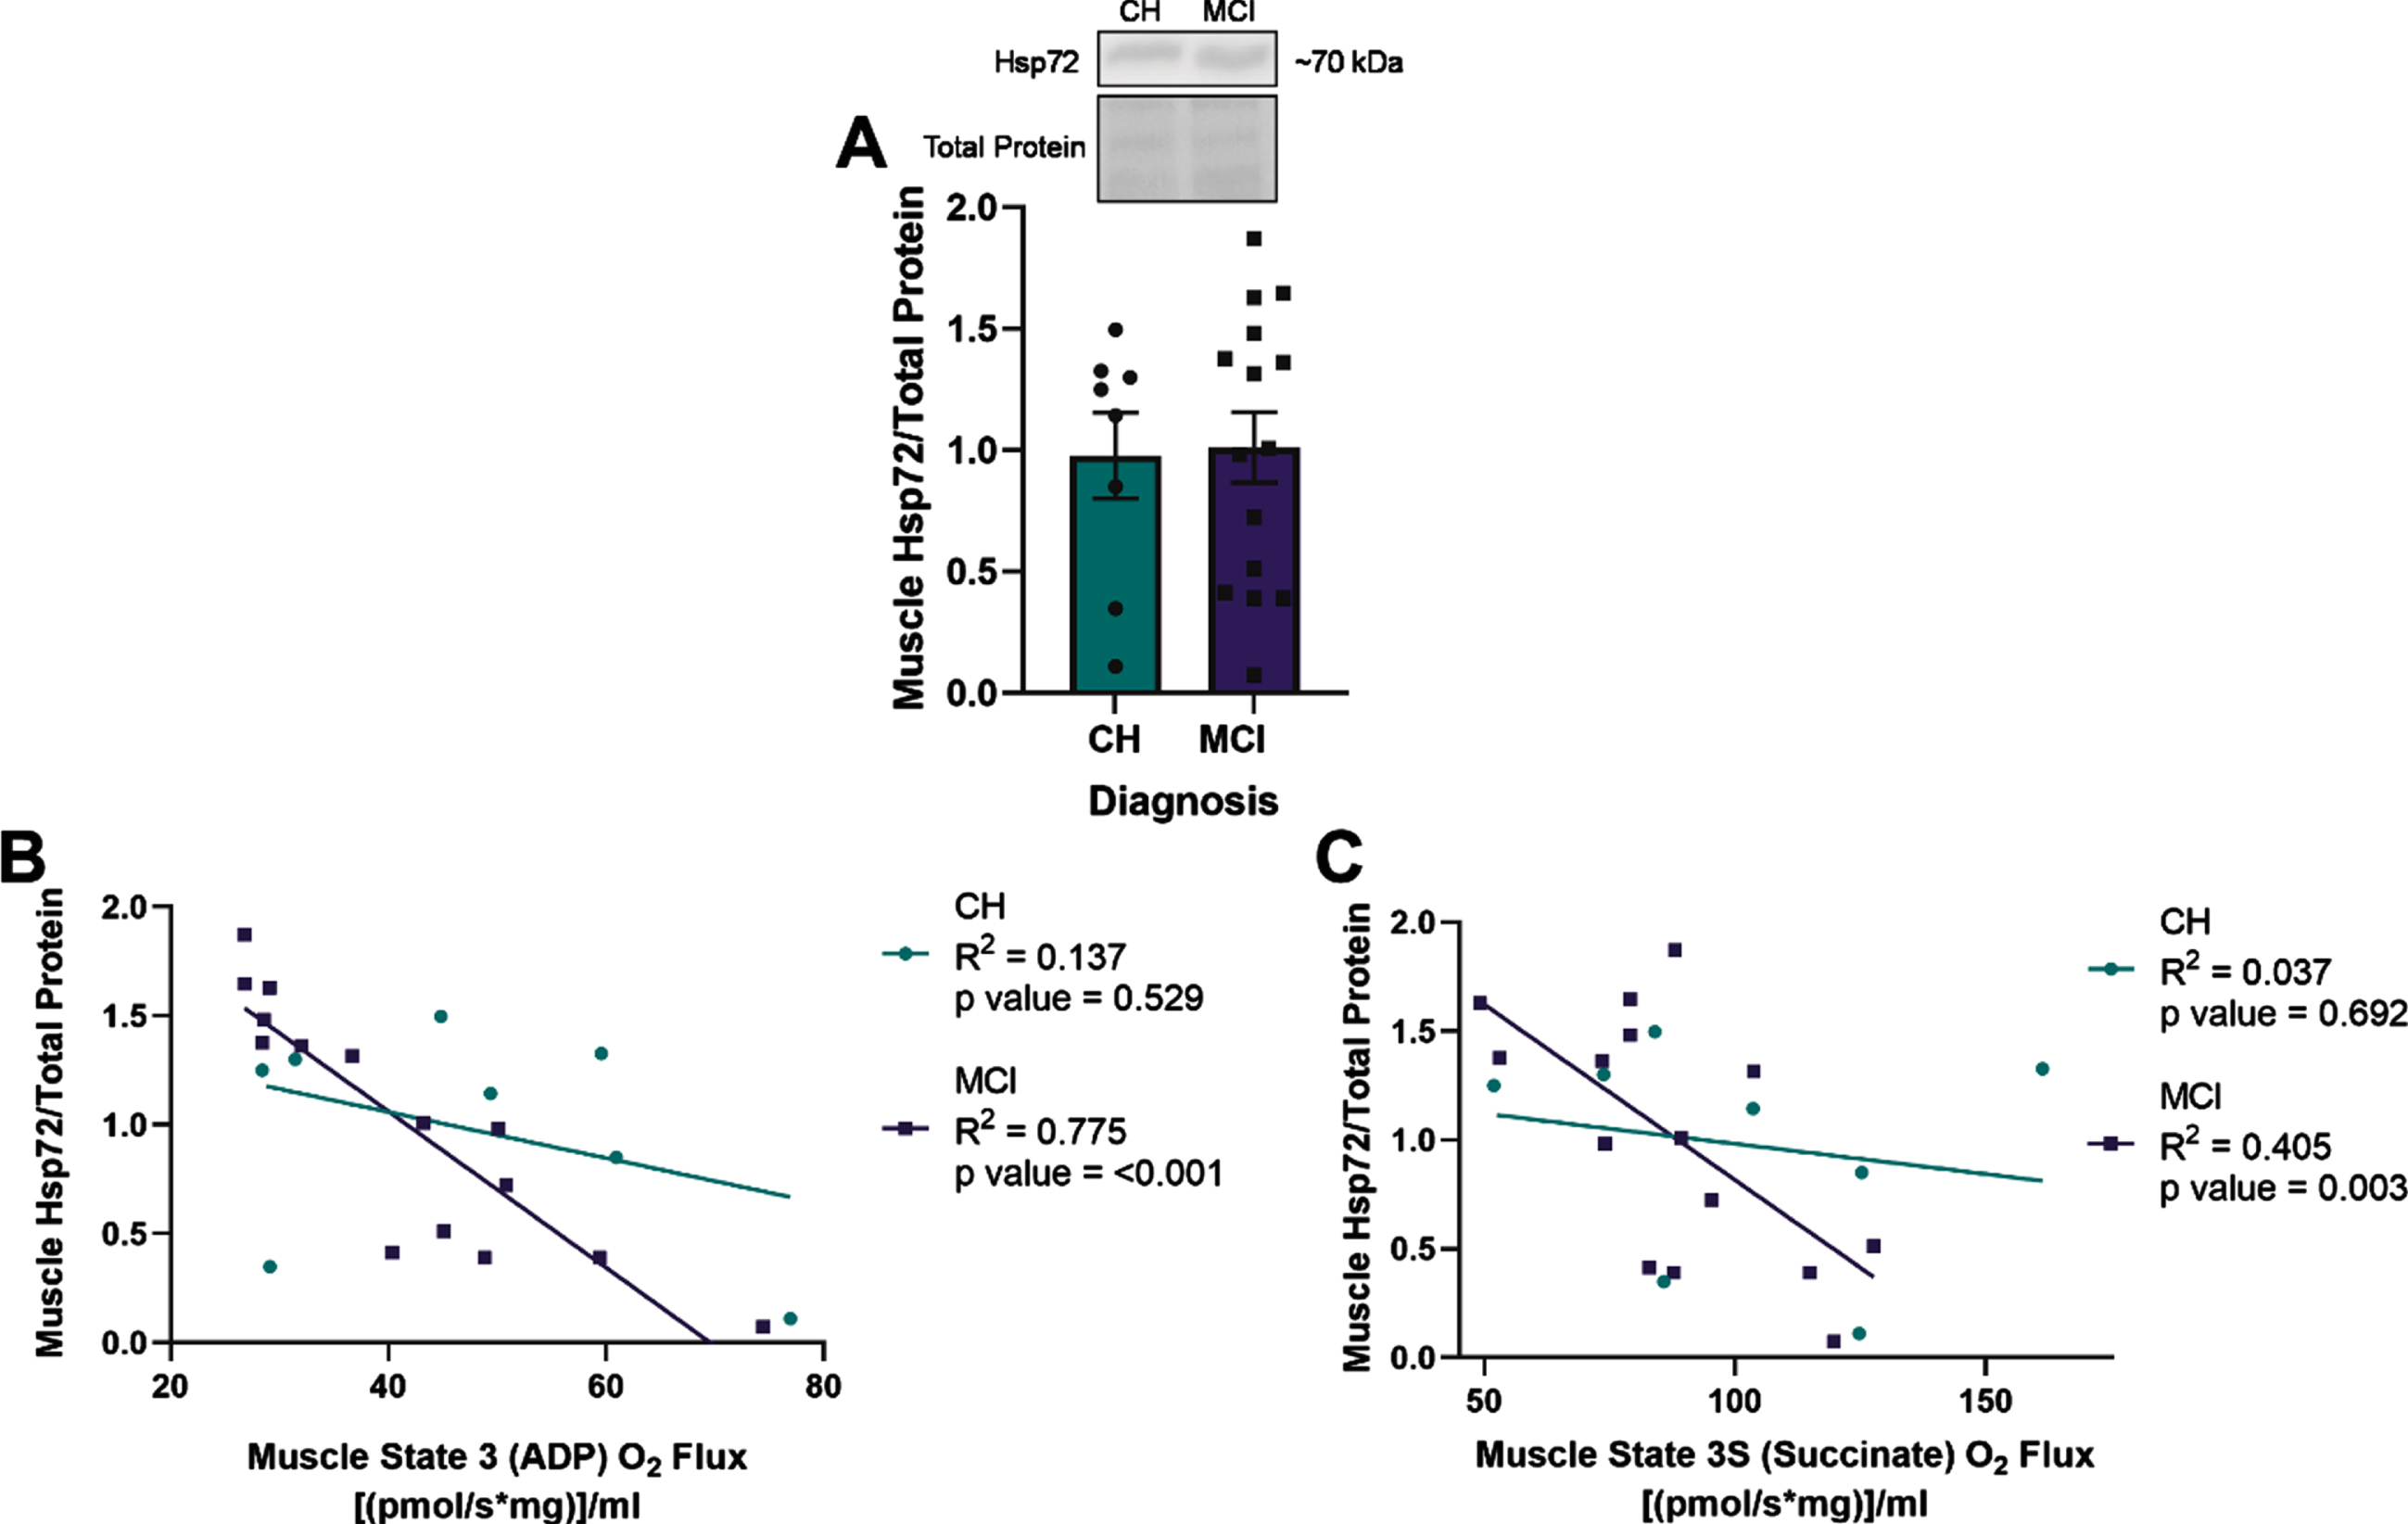 Heat shock protein 72 (Hsp72) expression negatively correlates with lipid-stimulated mitochondrial respiration in skeletal muscle of apolipoprotein ɛ4 (APOE4) carriers with mild cognitive impairment (MCI). Mean muscle Hsp72±standard error measured by Western blot in relationship to diagnostic status (A). Muscle Hsp72 in relationship to muscle State 3 (ADP) O2 flux (B) or State 3S (Succinate) O2 flux (C) measured by Oroboros. CH, cognitively healthy older adults; MCI, mild cognitive impairment. CH APOE4 carriers (n = 8), MCI APOE4 carriers (n = 15).